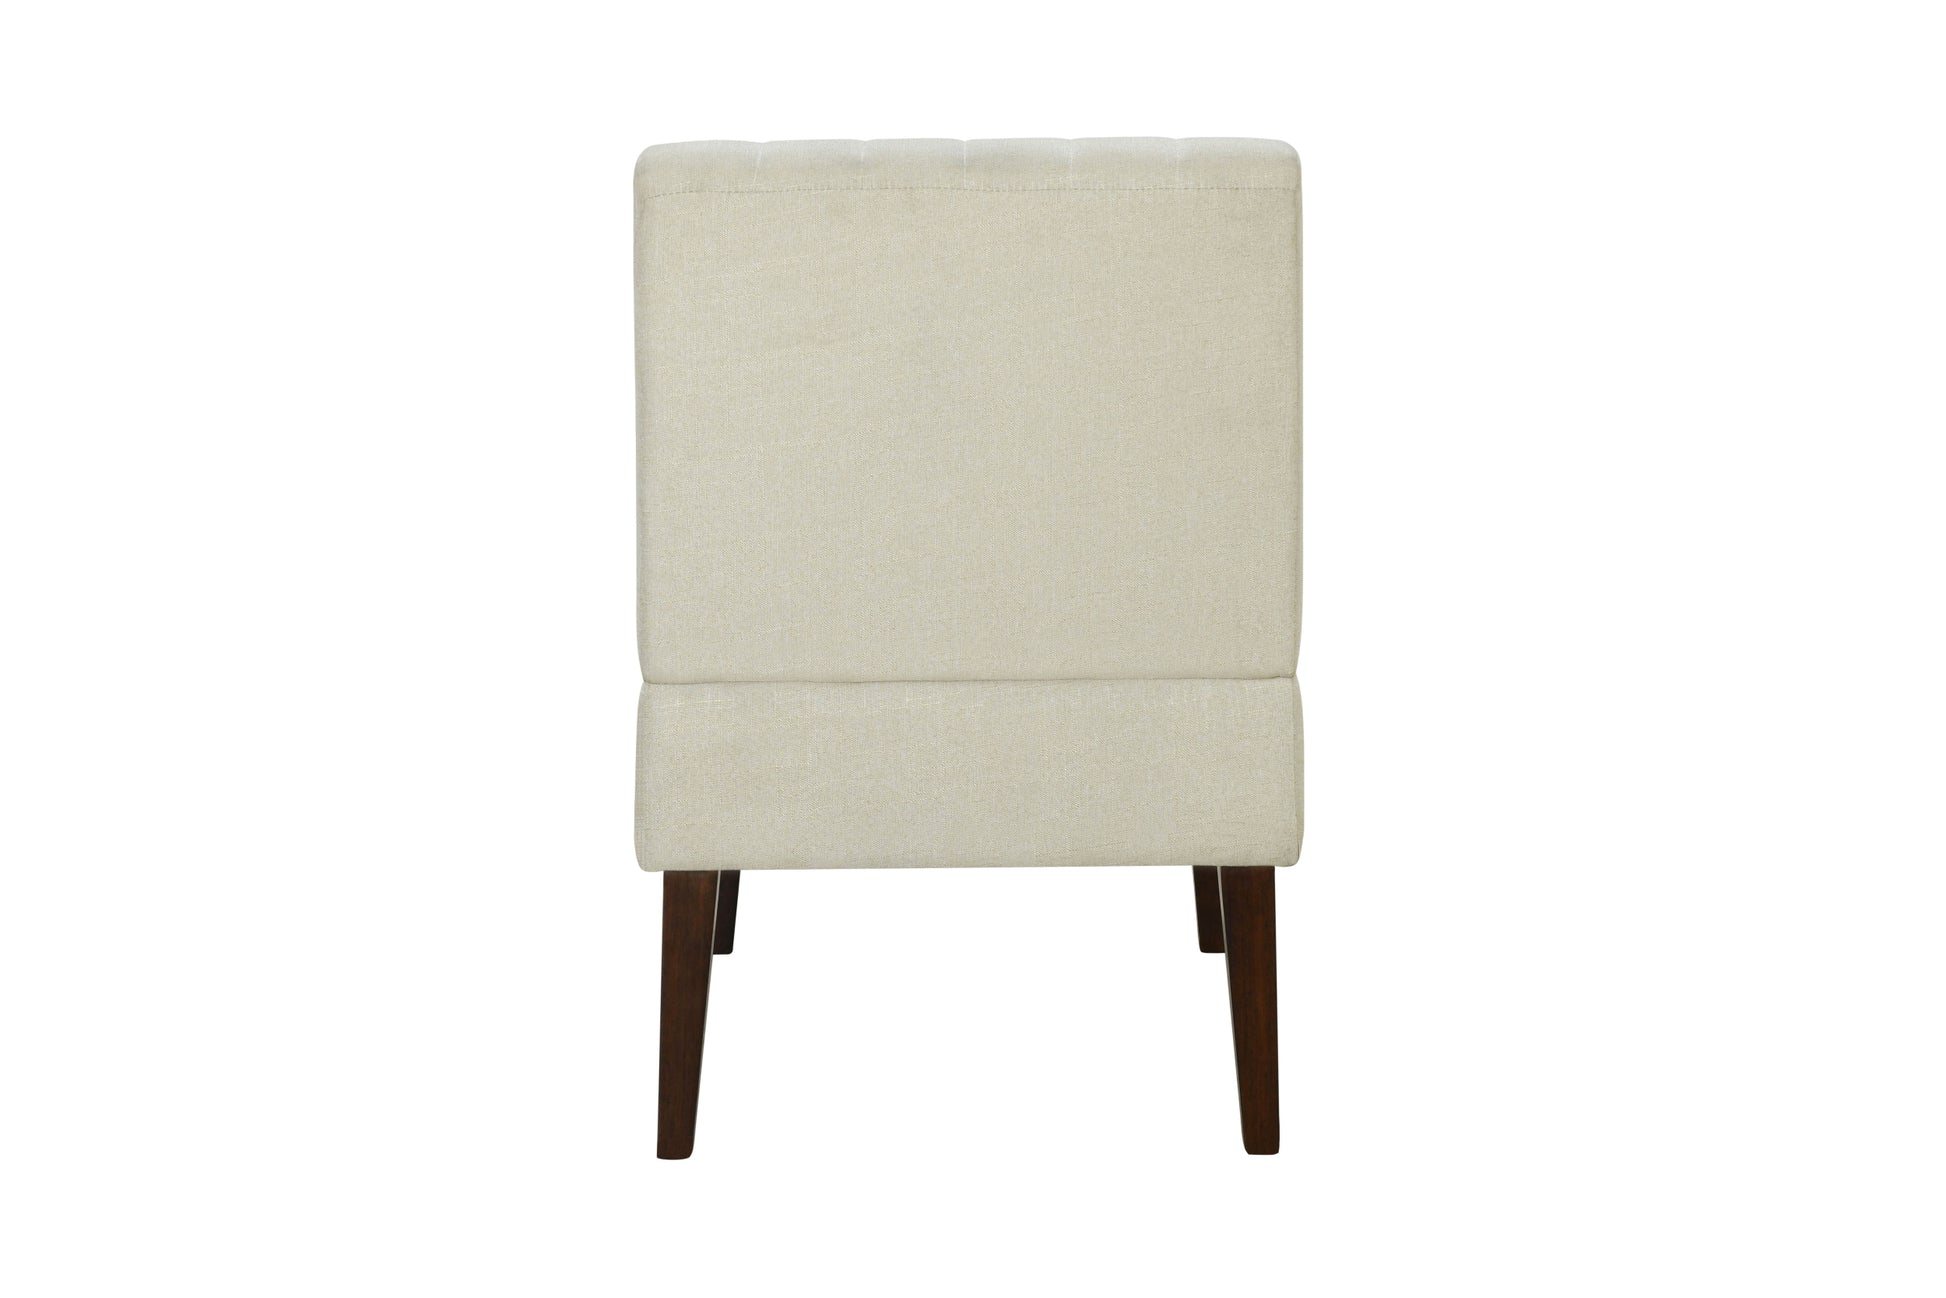 Stylish Comfortable Accent Chair 1pc Beige Fabric beige-primary living space-wood